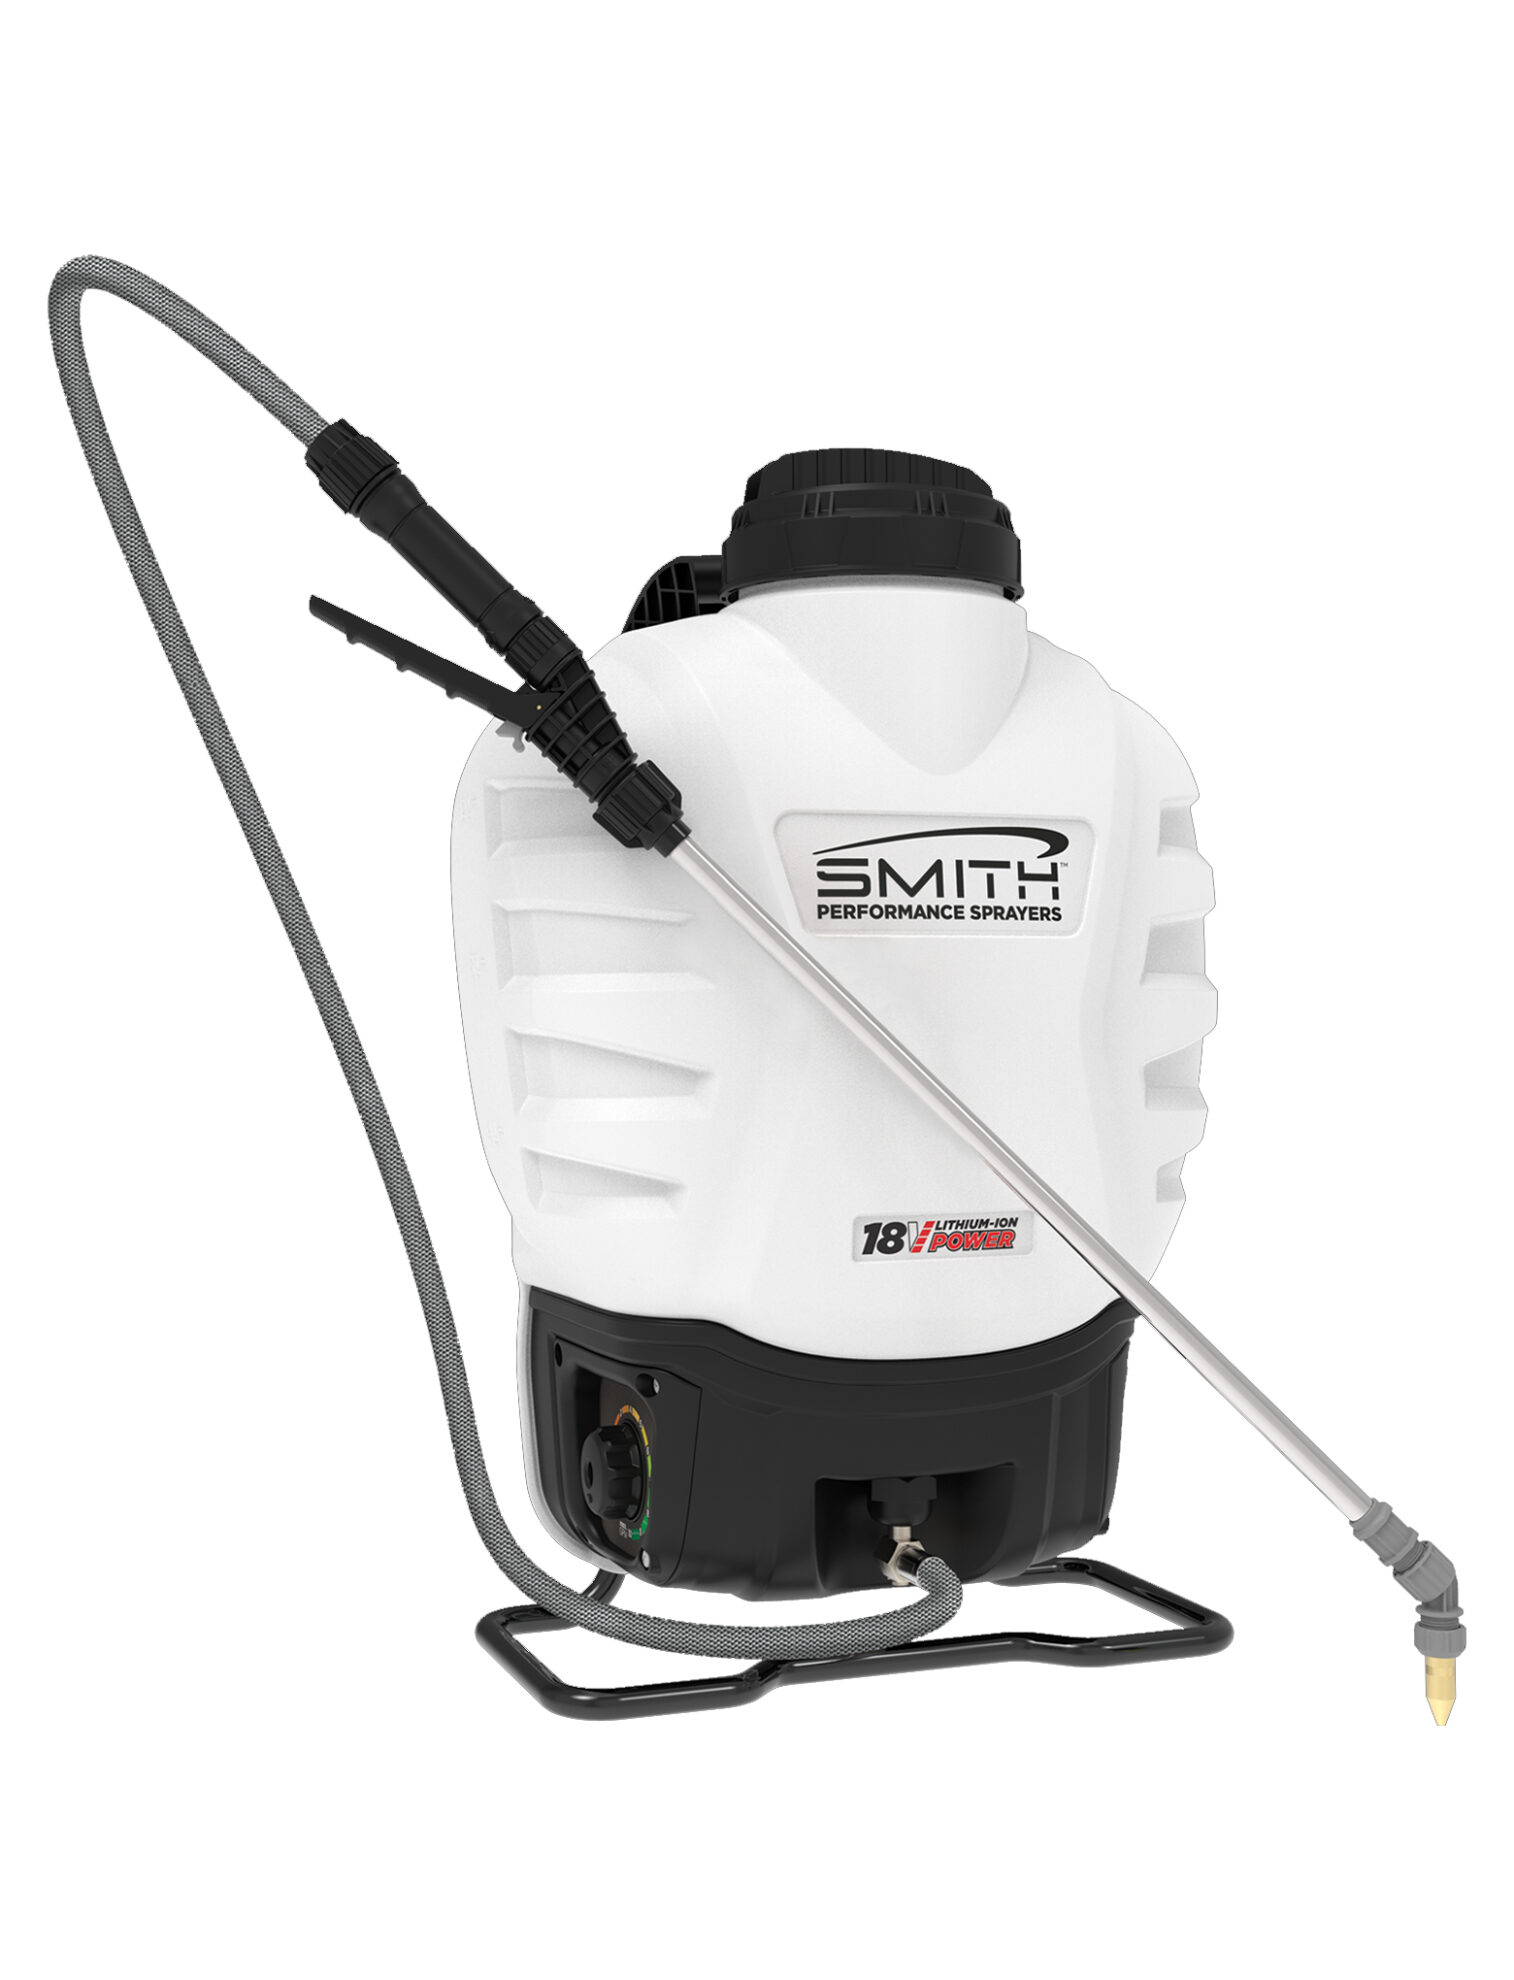 SMITH 15L BACKPACK BATTERY SPRAYER BY FLEXTOOL - Hills Irrigation ...